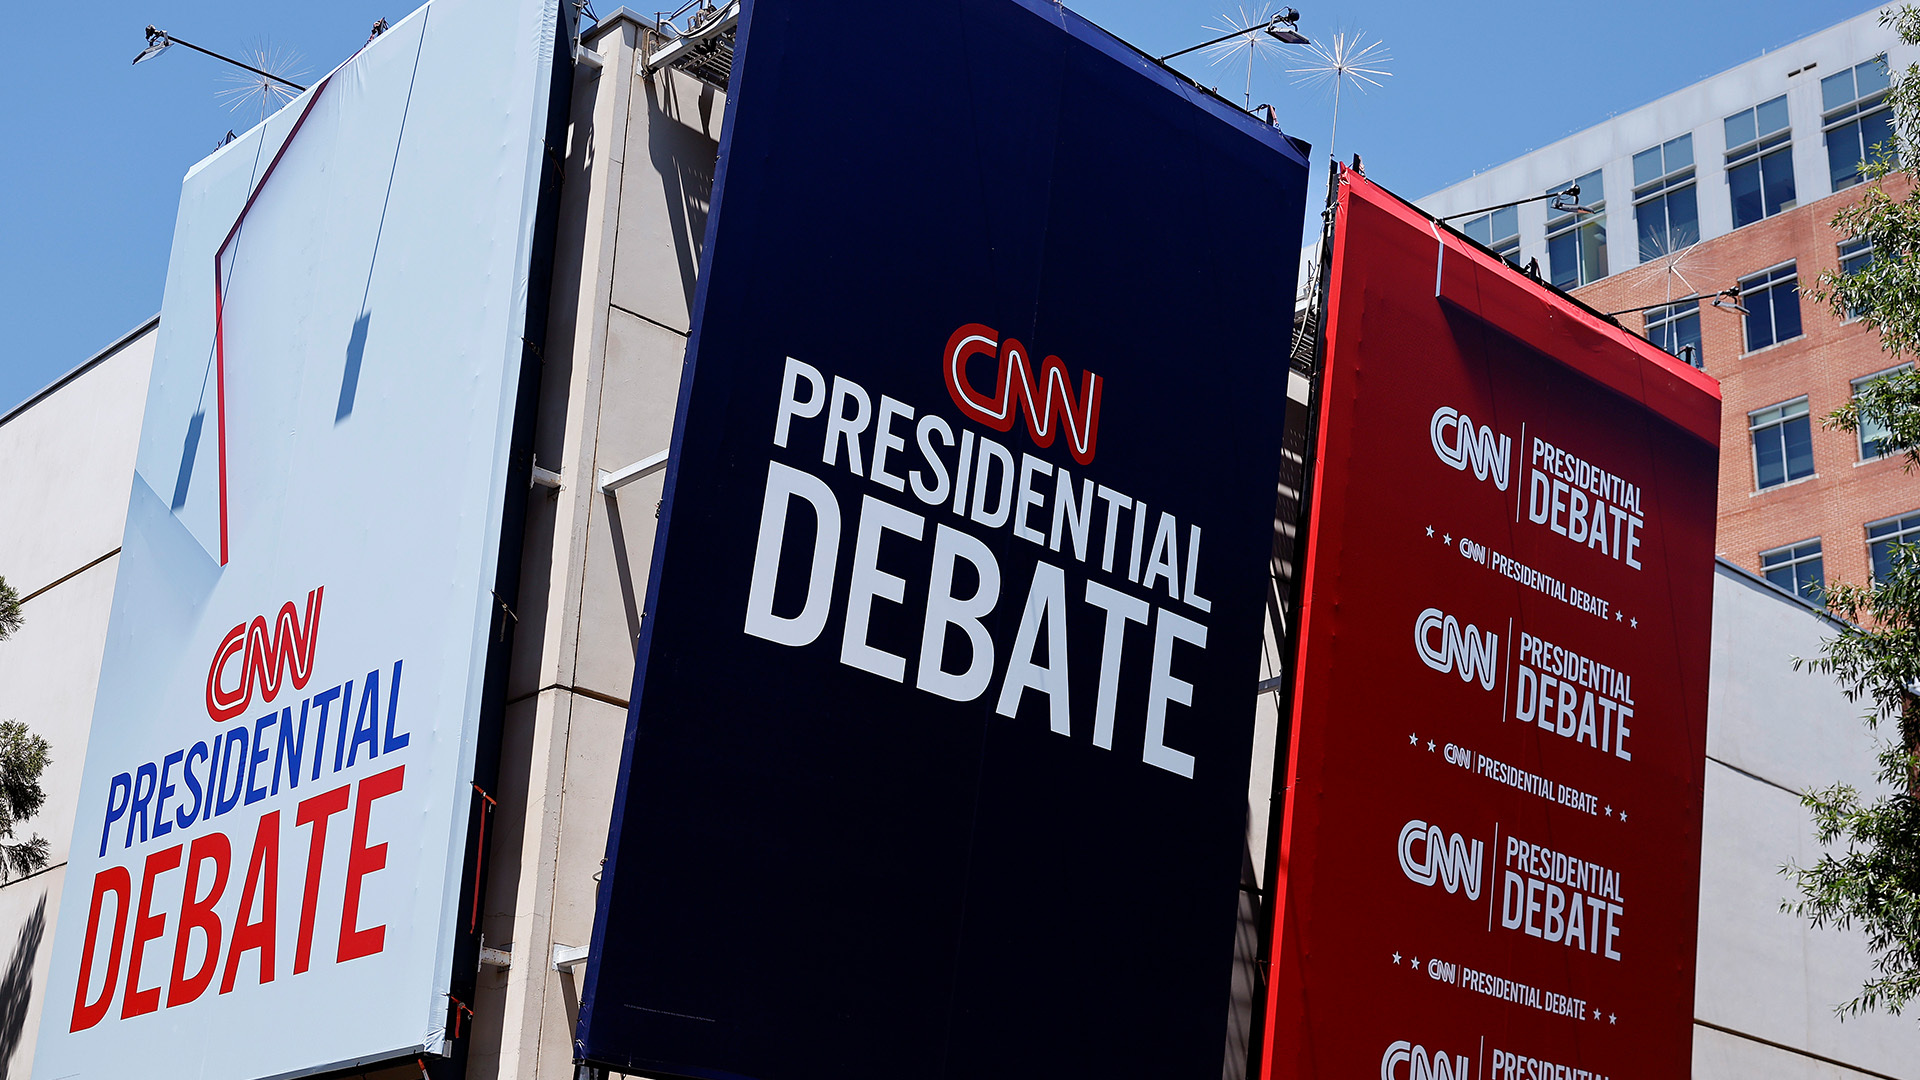 Ahead of the first presidential debate, both the media and the candidates have prepared different fact-checking methods.